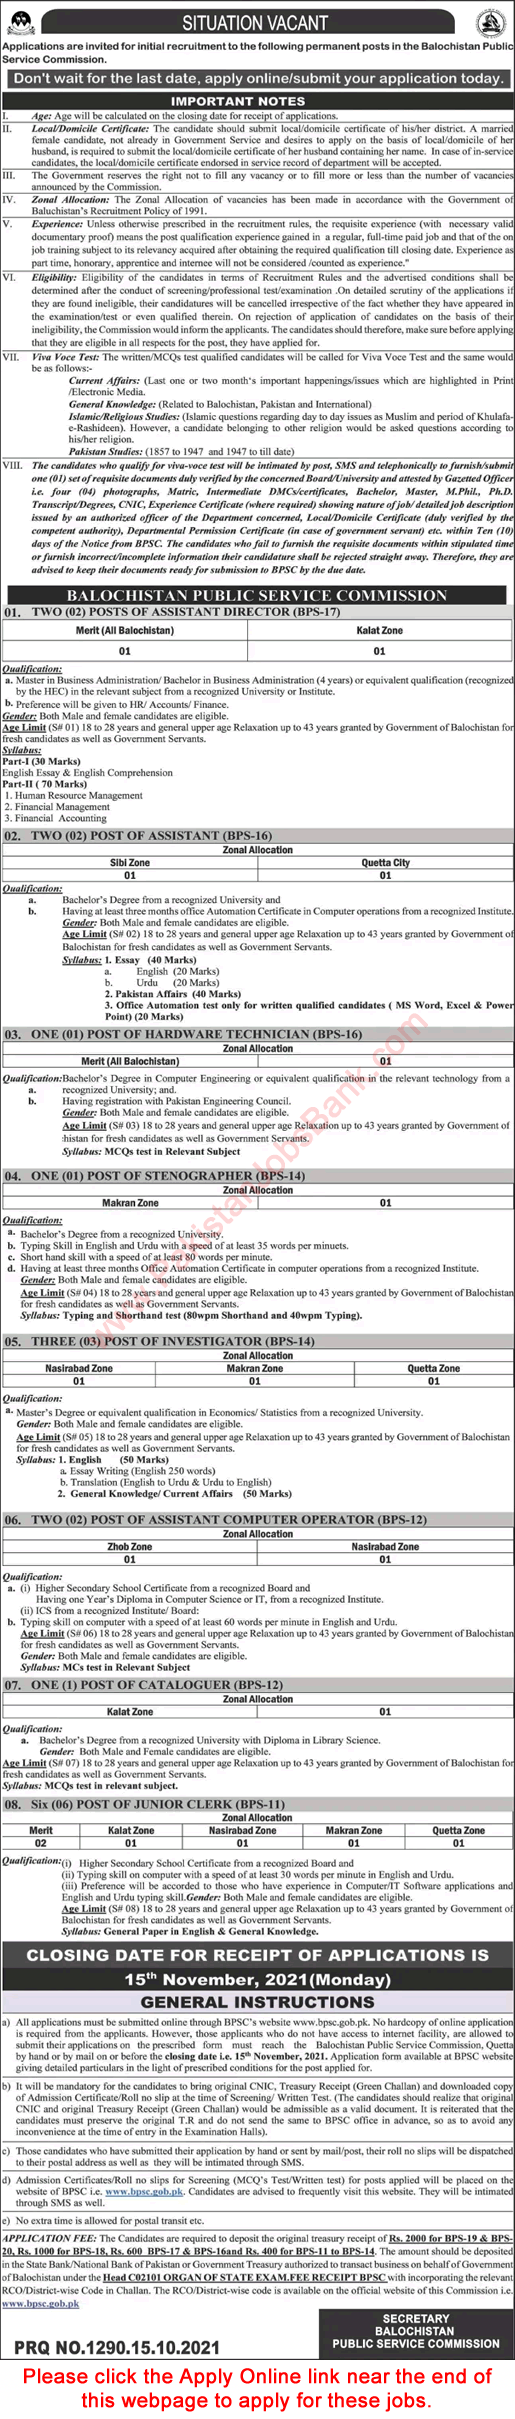 BPSC Jobs October 2021 Apply Online Consolidated Advertisement No 08/2021 Latest